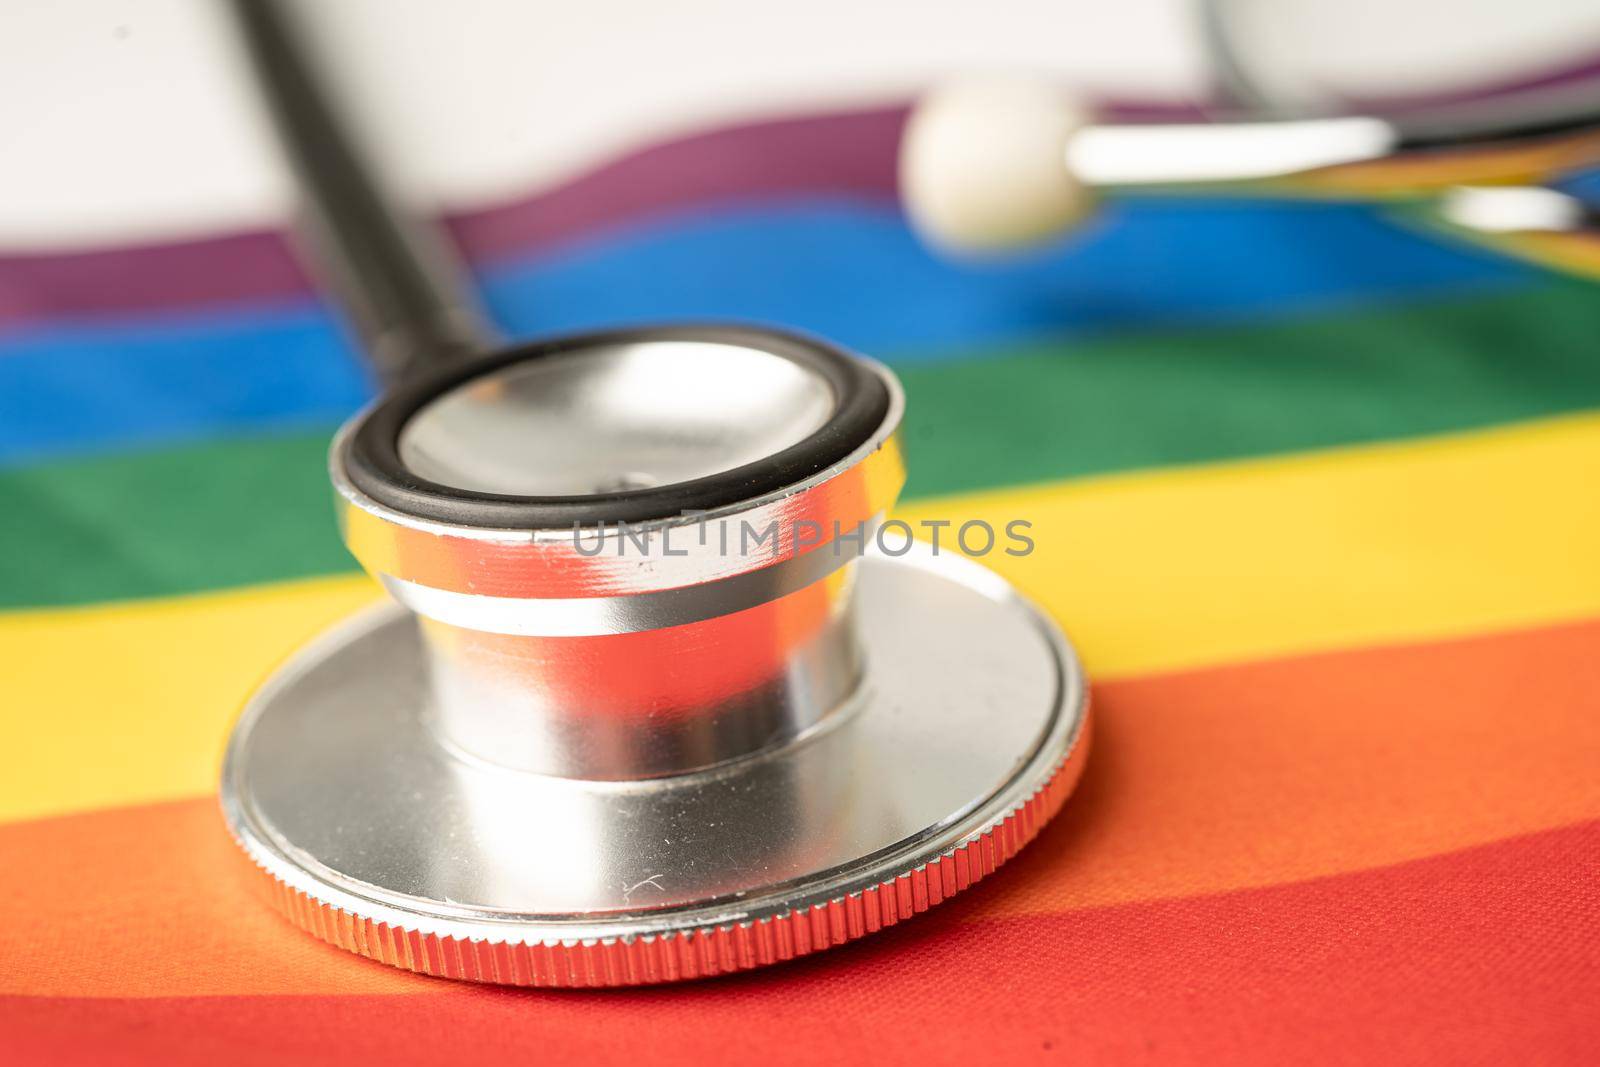 Black stethoscope on rainbow flag background, symbol of LGBT pride month celebrate annual in June social, symbol of gay, lesbian, bisexual, transgender, human rights and peace. by pamai